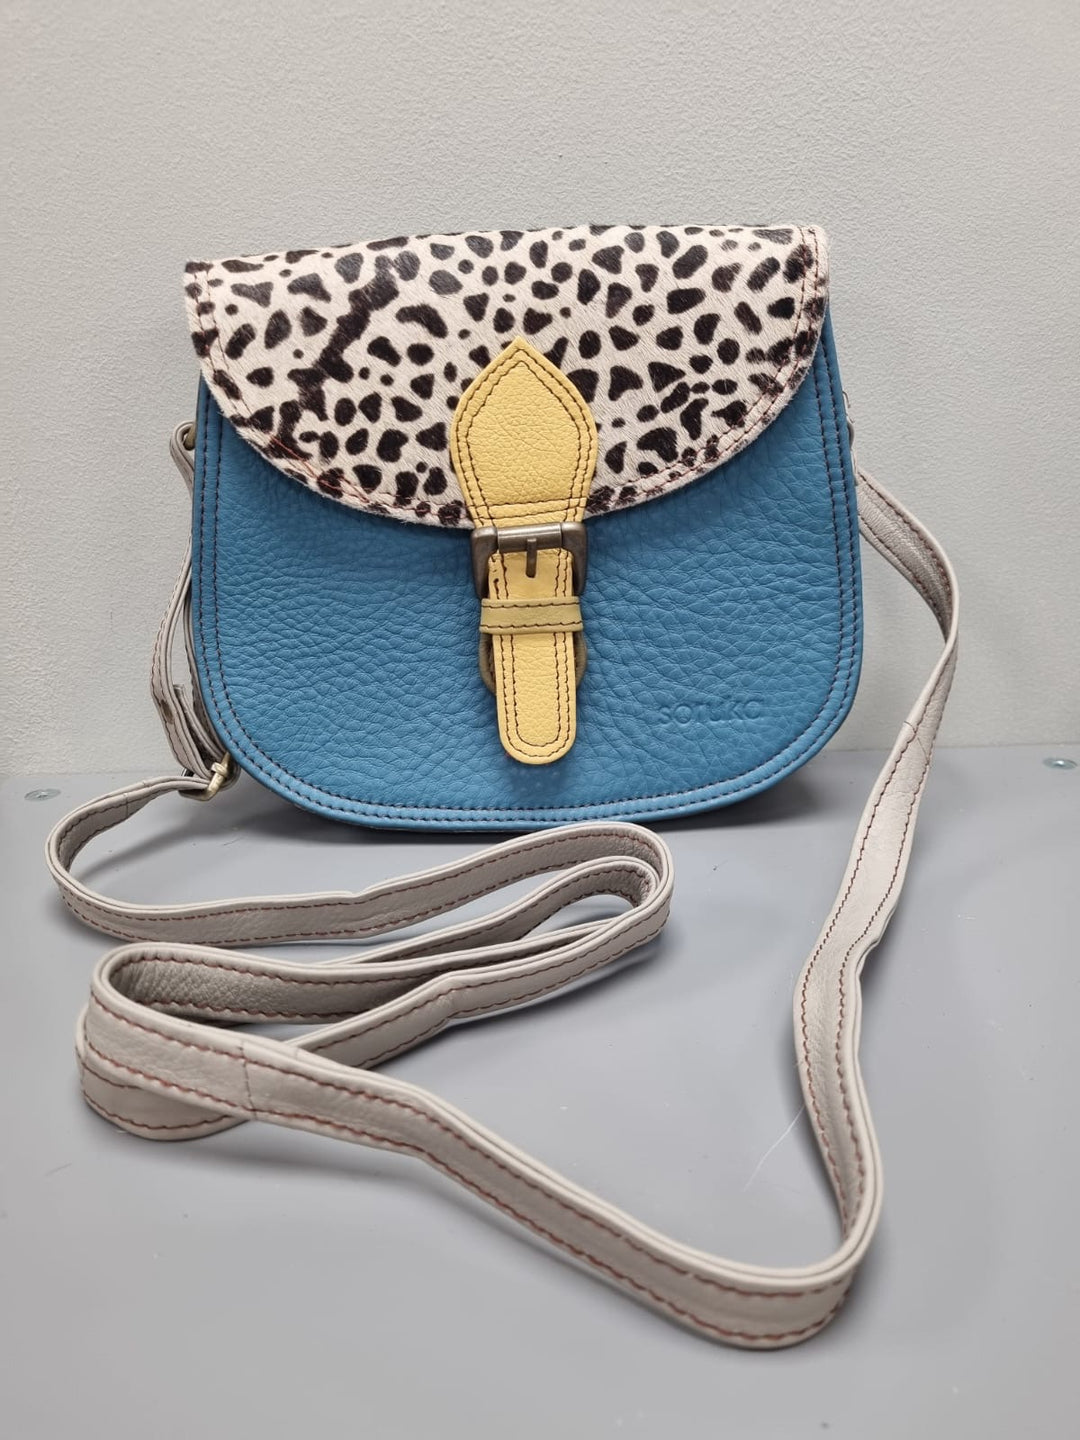 Ally Leather Cross Body Bag - Blue Leather & Animal Print